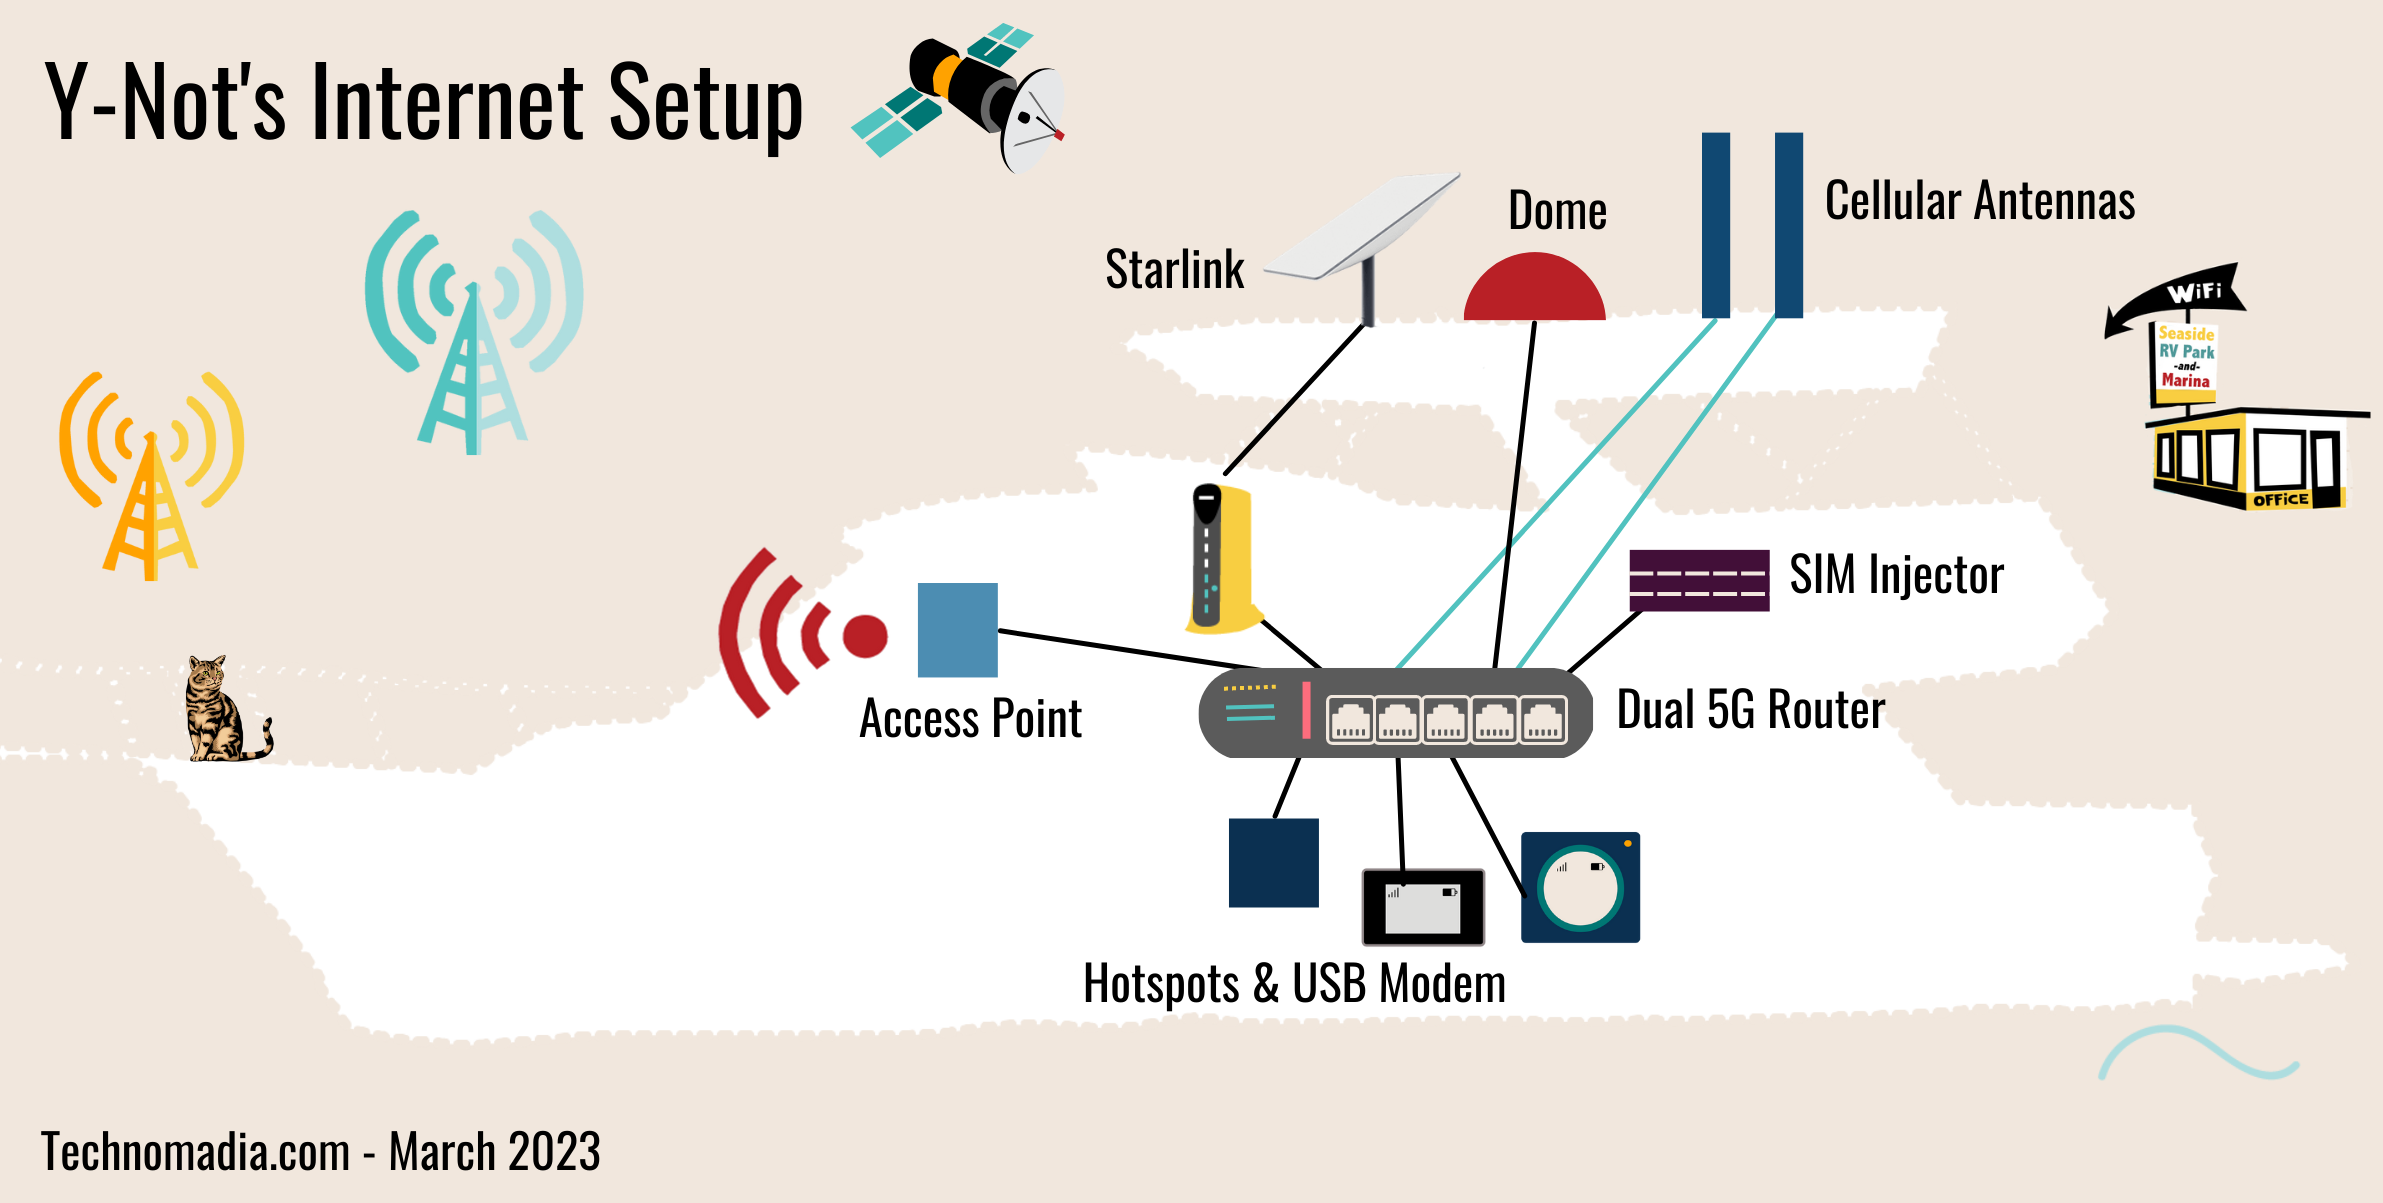 Starlink Satellite Internet for Mobile RV and Boat Use - Mobile